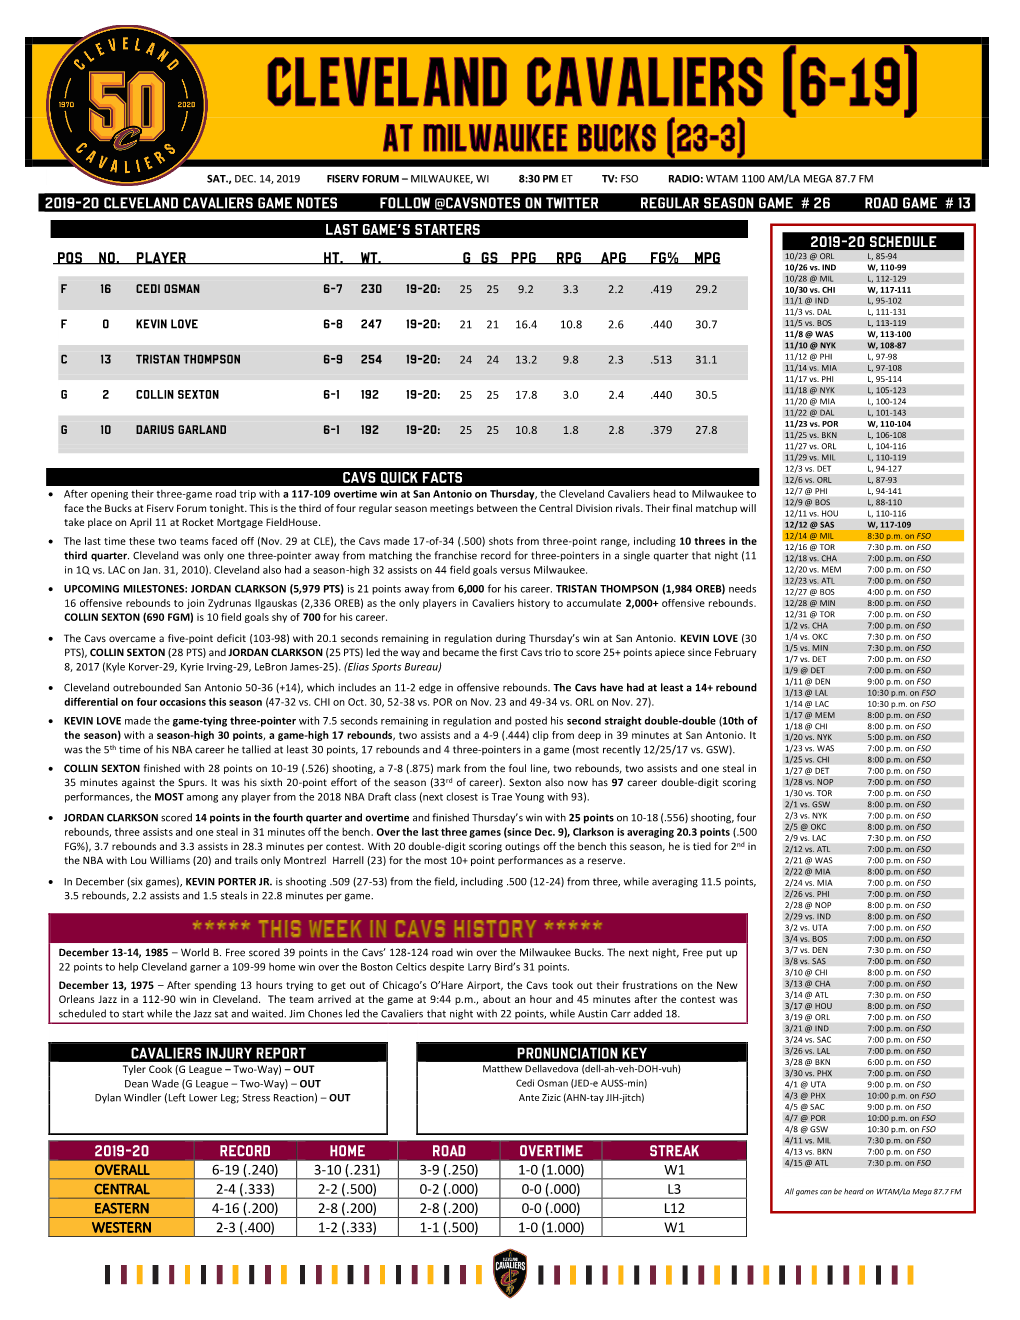 2019-20 Cleveland Cavaliers Game Notes Follow @Cavsnotes on Twitter Regular Season Game # 26 Road Game # 13